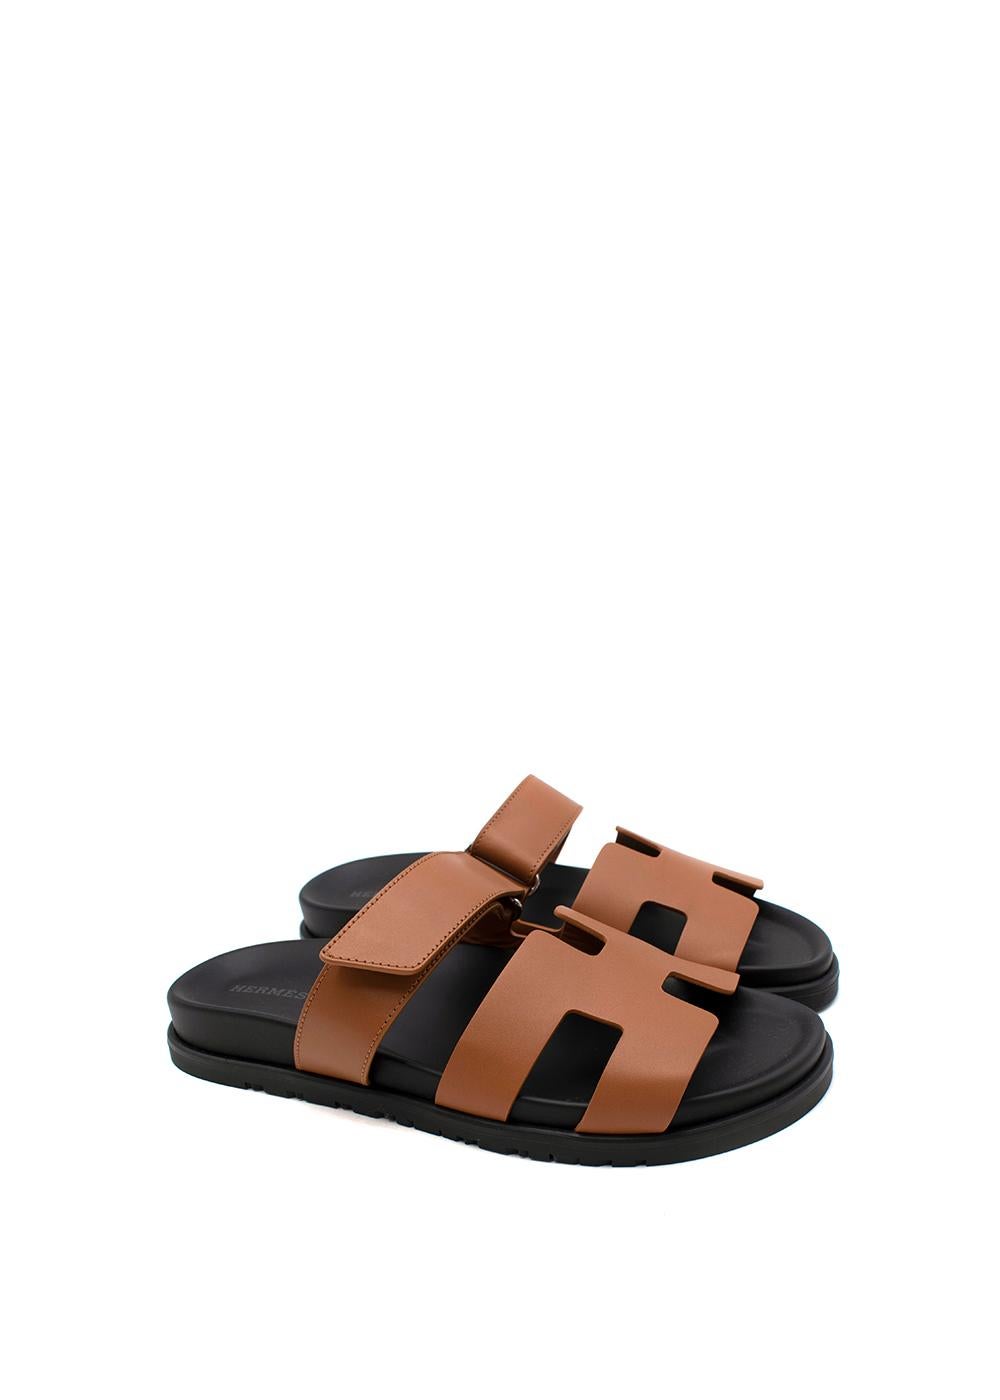 Hermes Naturel Calfskin Chypre Sandal 

-Calfskin leather
-Black rubber sole
-Natural calfskin insole
-Natural goatskin lining
-Unworn, excellent condition with original box and dustbag
